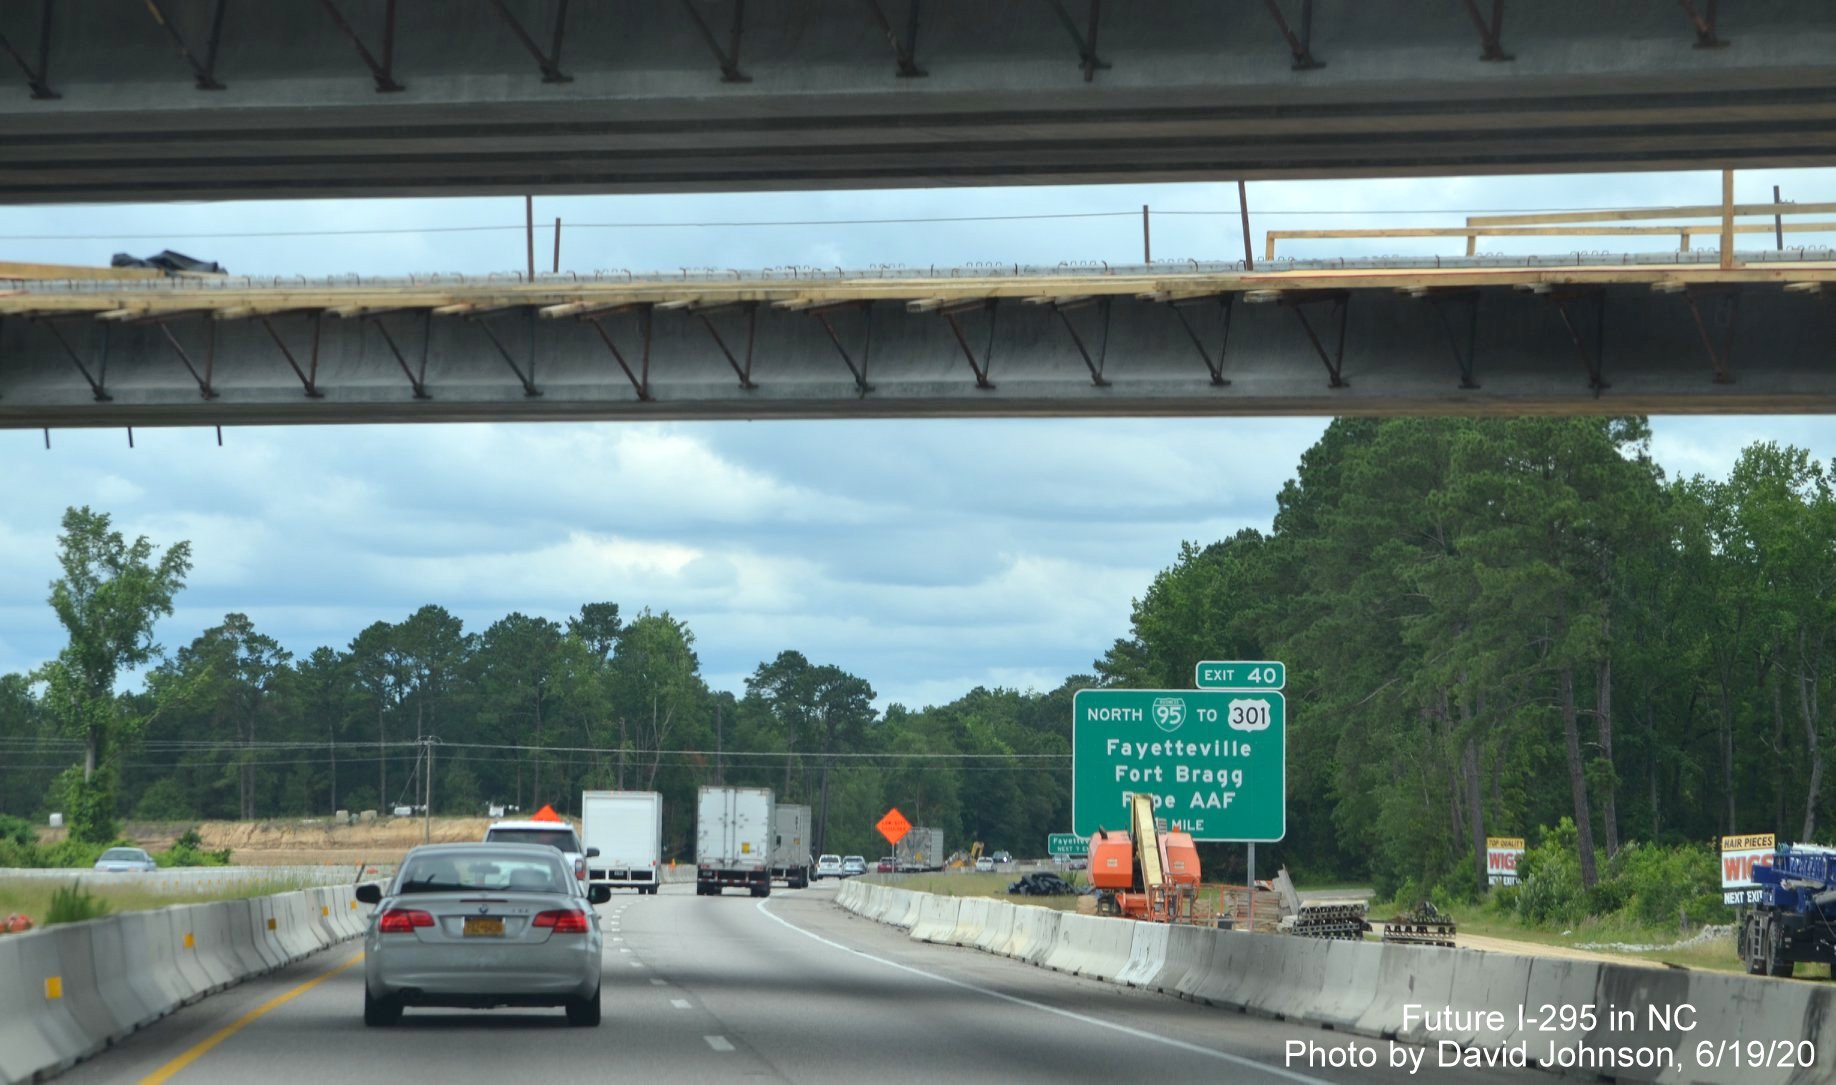 Image of second ramp bridge being constructed over I-95 North lanes near Hope Mills for future I-295 
        interchange, by David Johnson June 2020